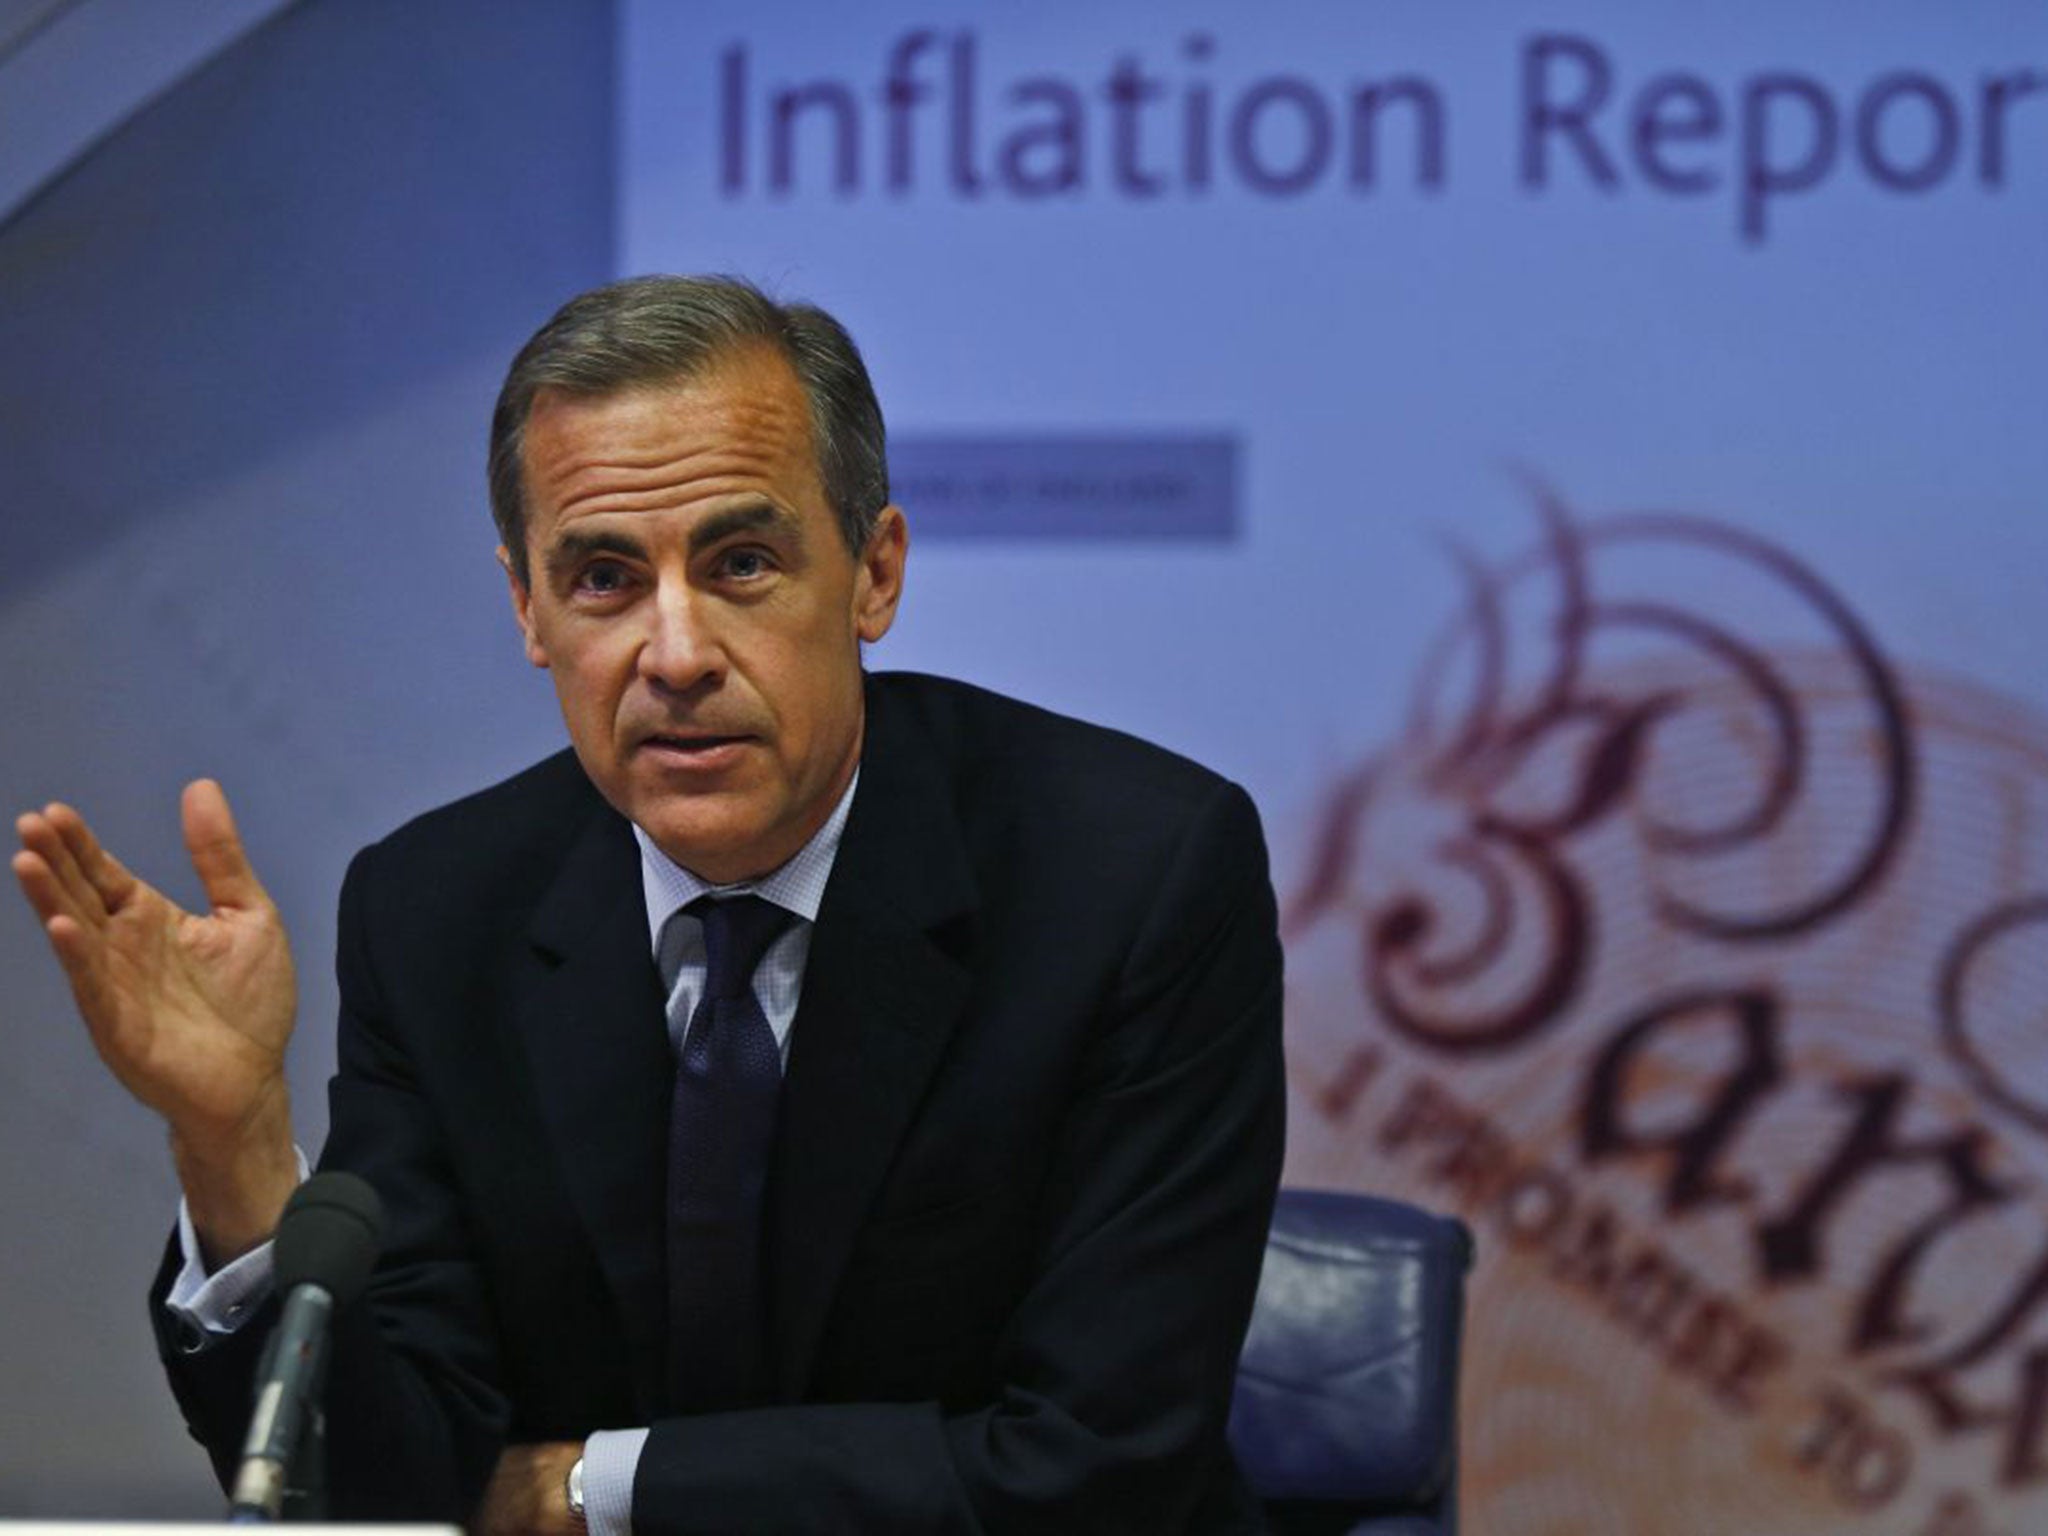 Bank of England Governor, Mark Carney, may be willing to offer cash to the major banks around the time of the EU referendum